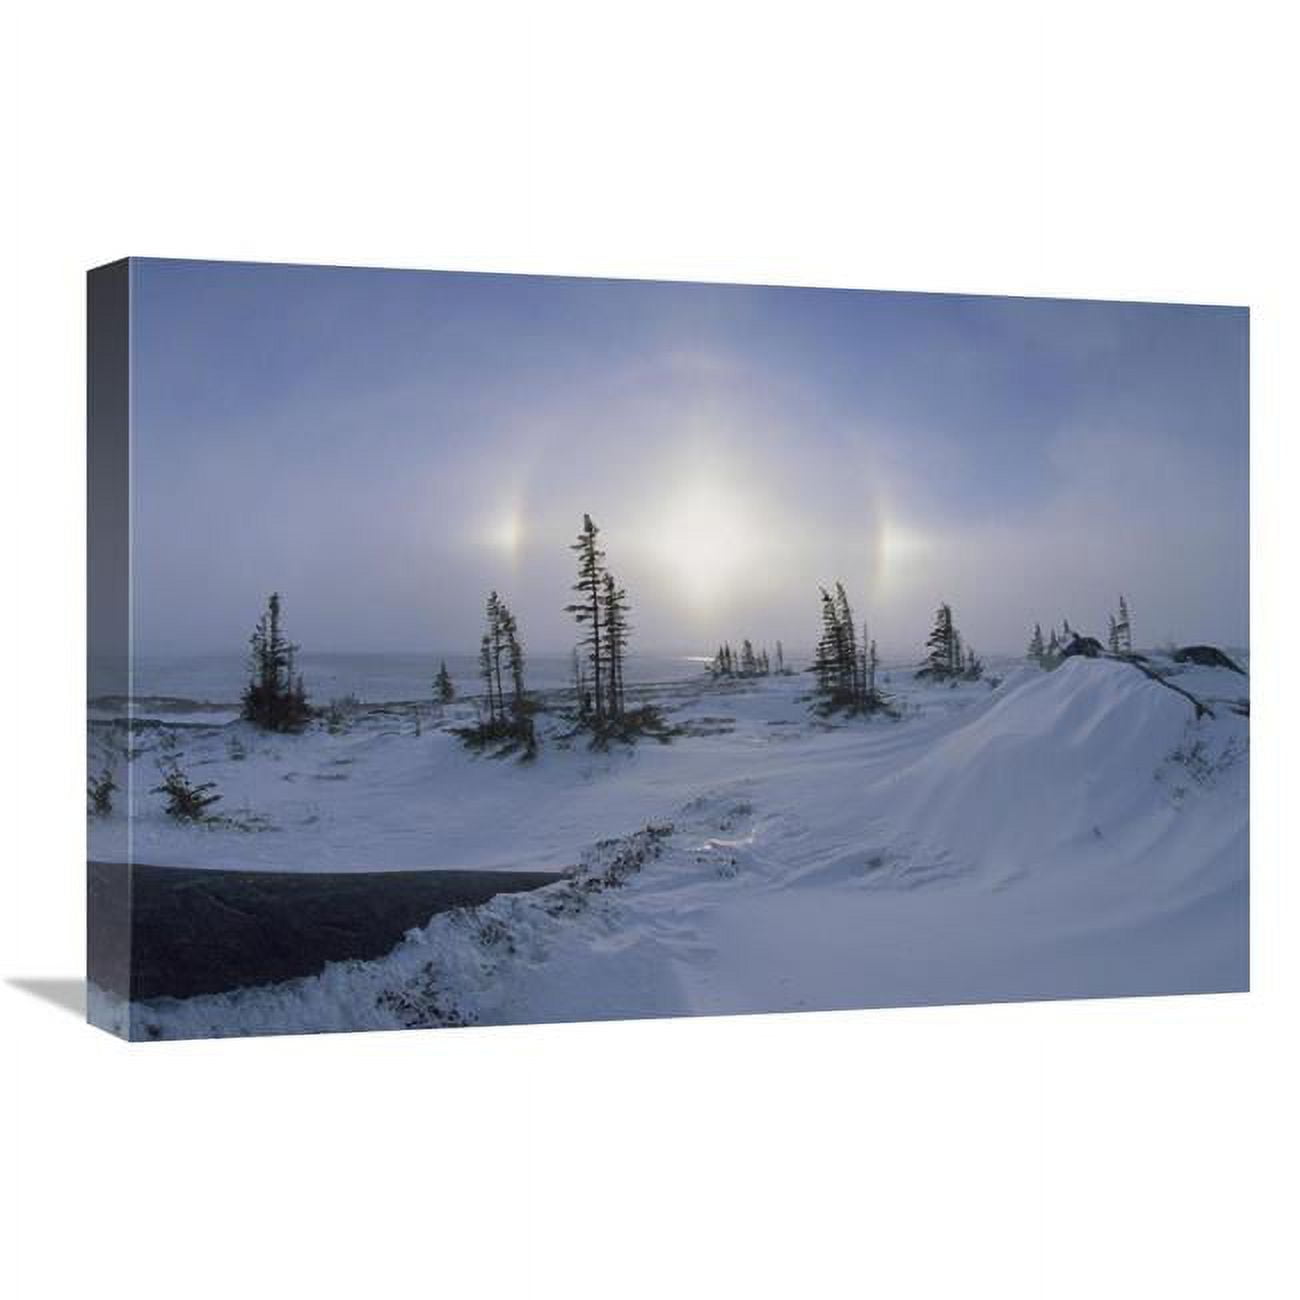 JensenDistributionServices 16 x 24 in. Spruce Forest in Snow with Sundogs, Hudson Bay, Canada Art Print - Konrad Wothe